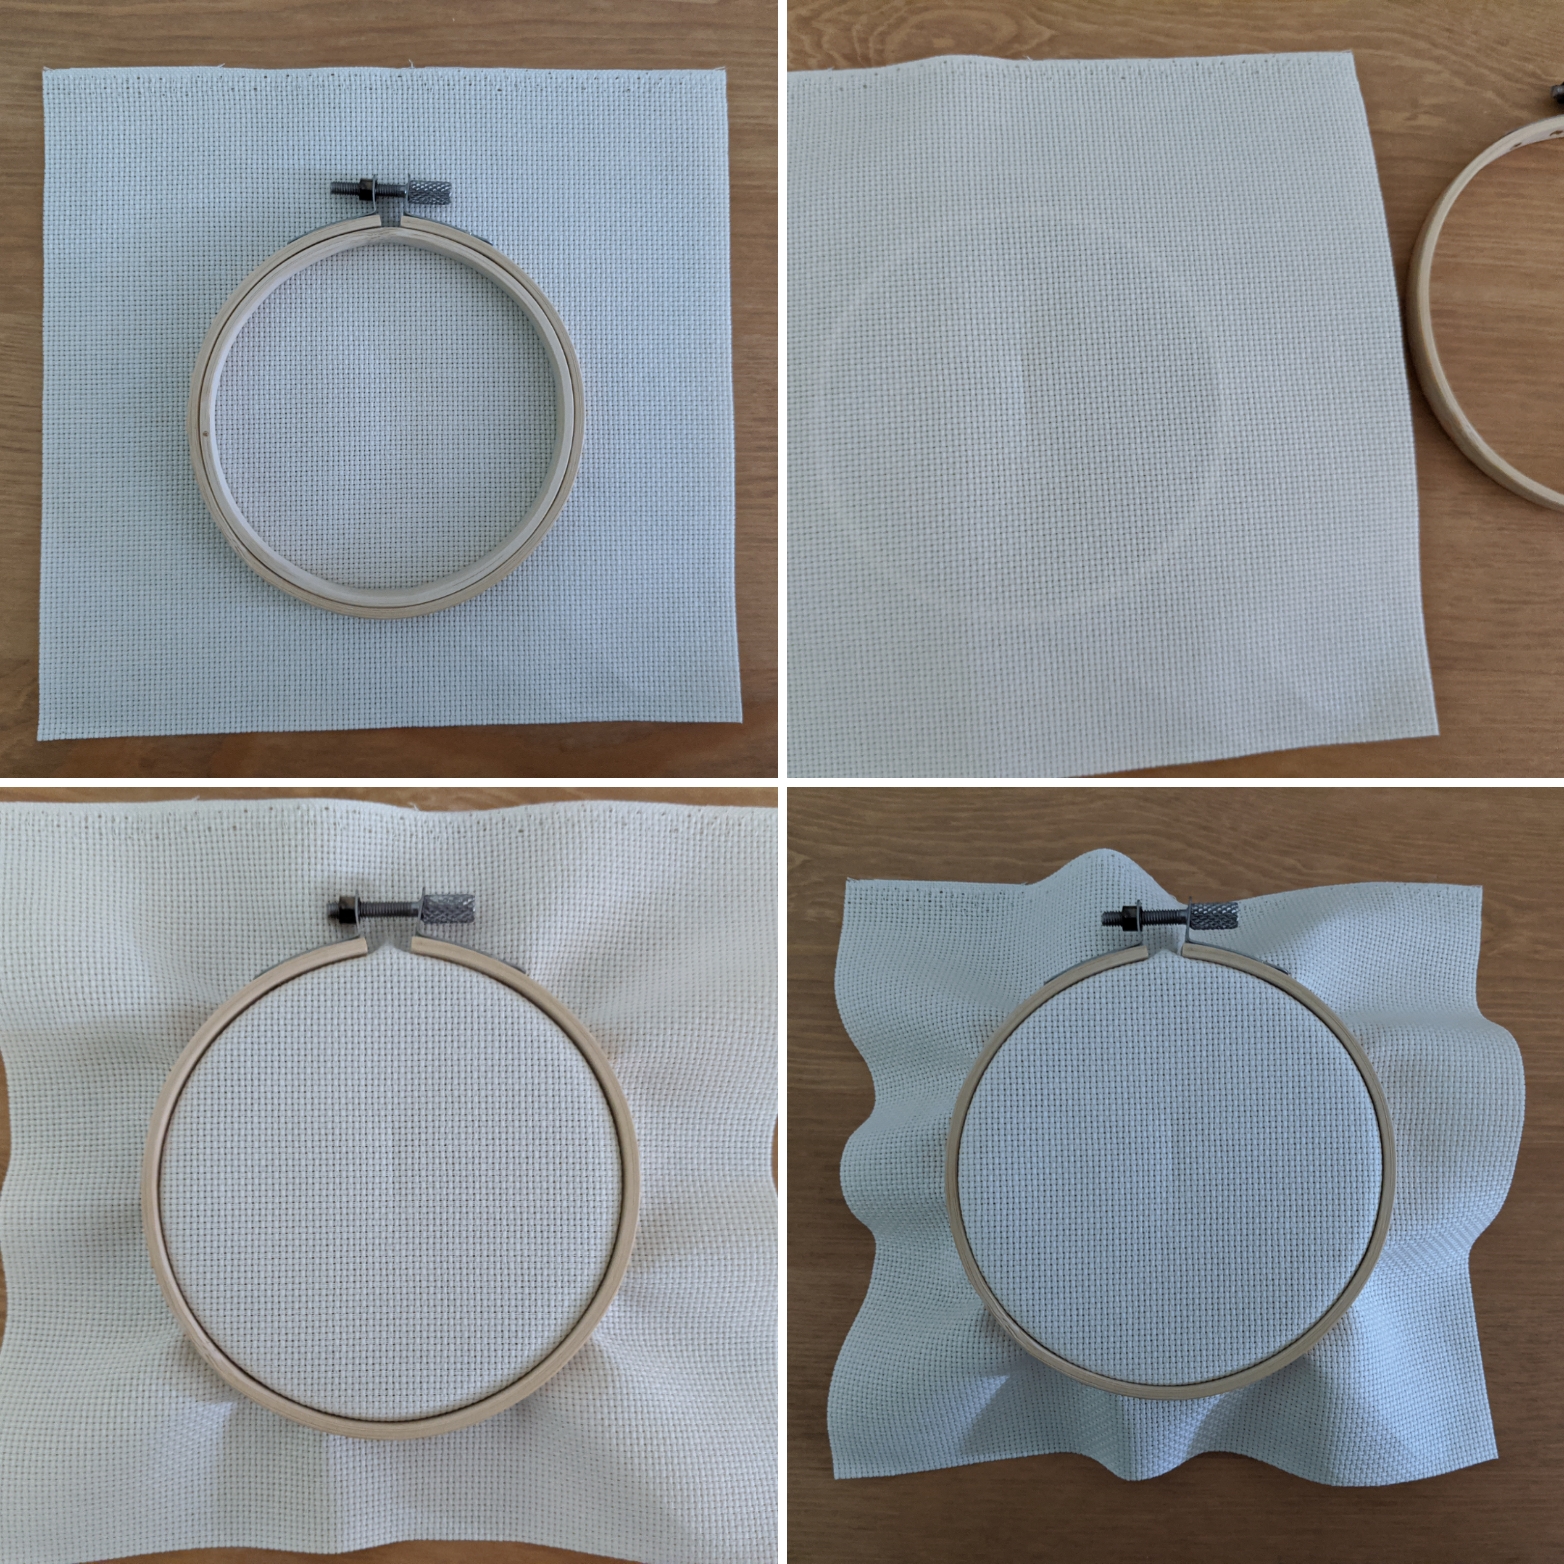 prepping a cross-stitch hoop with fabric